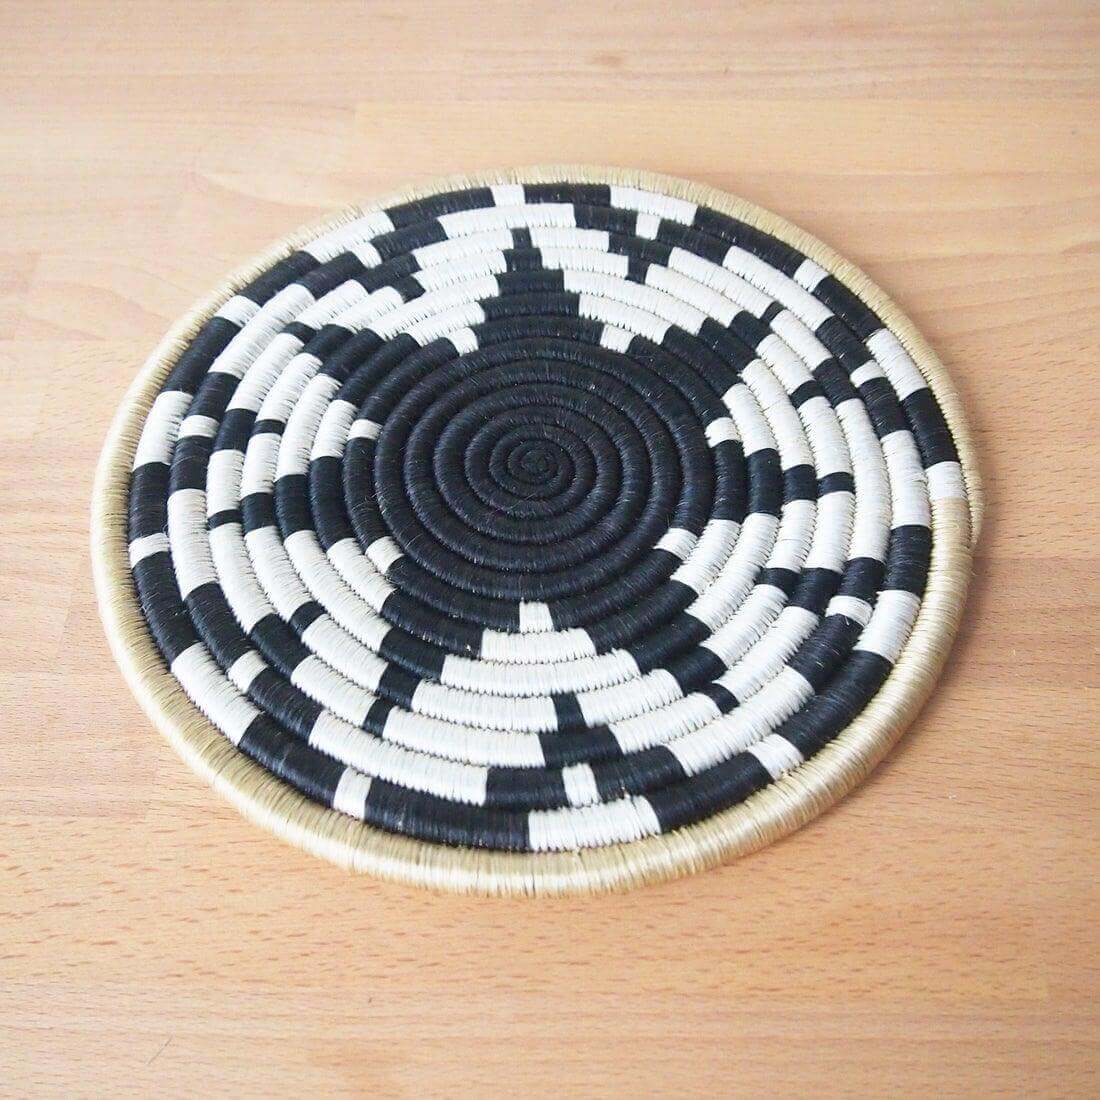 Handwoven pan trivet in black and white